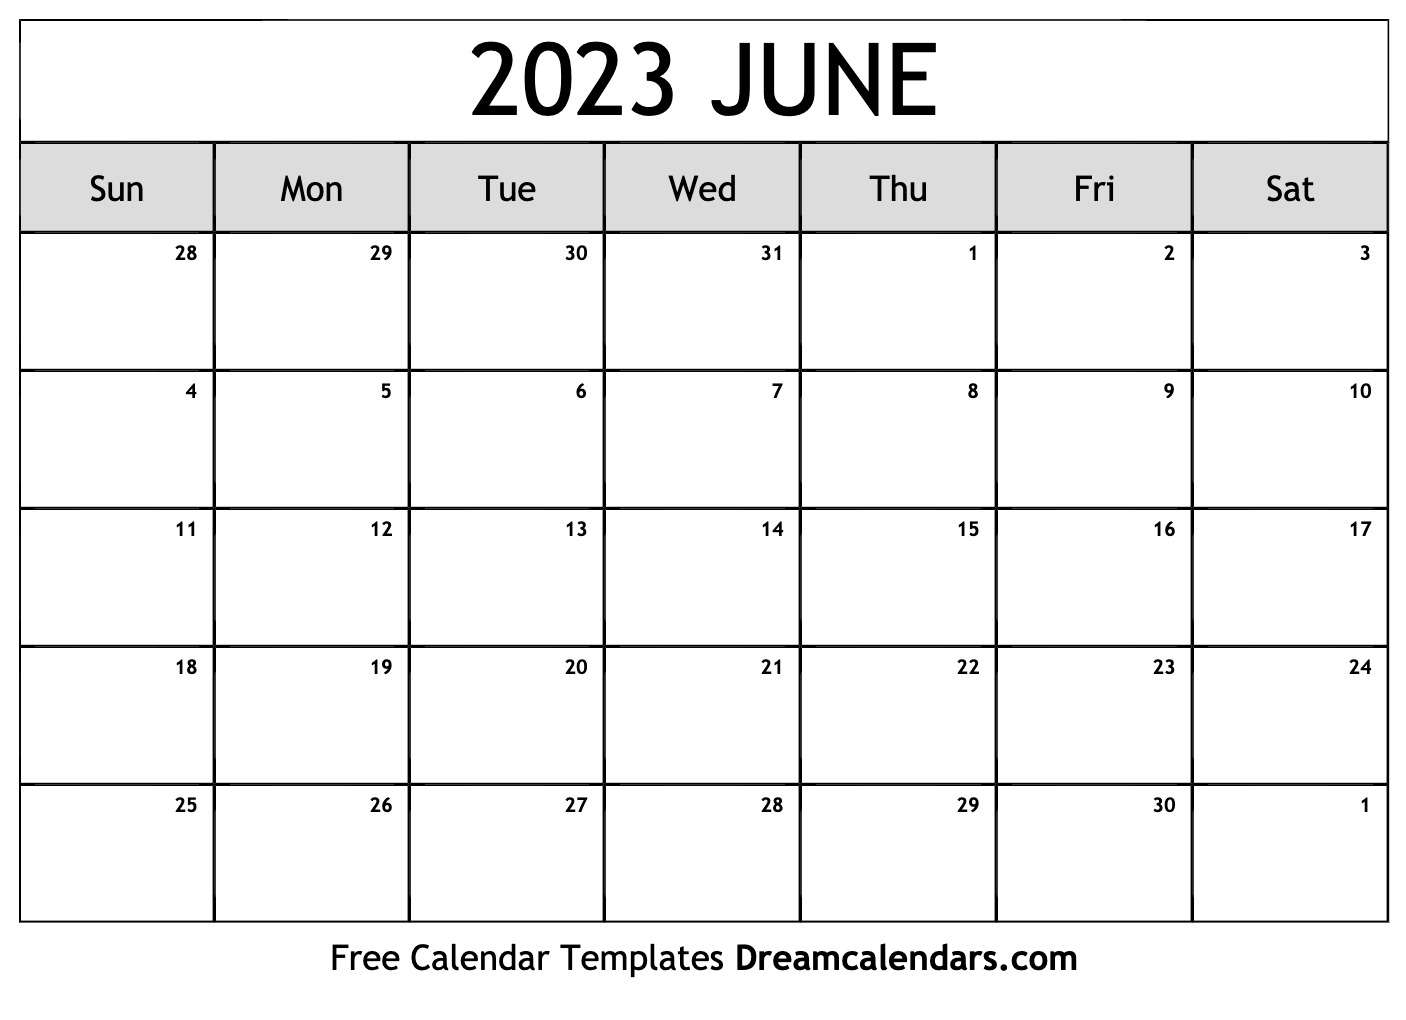 july-2023-2024-calendar-free-printable-with-holidays